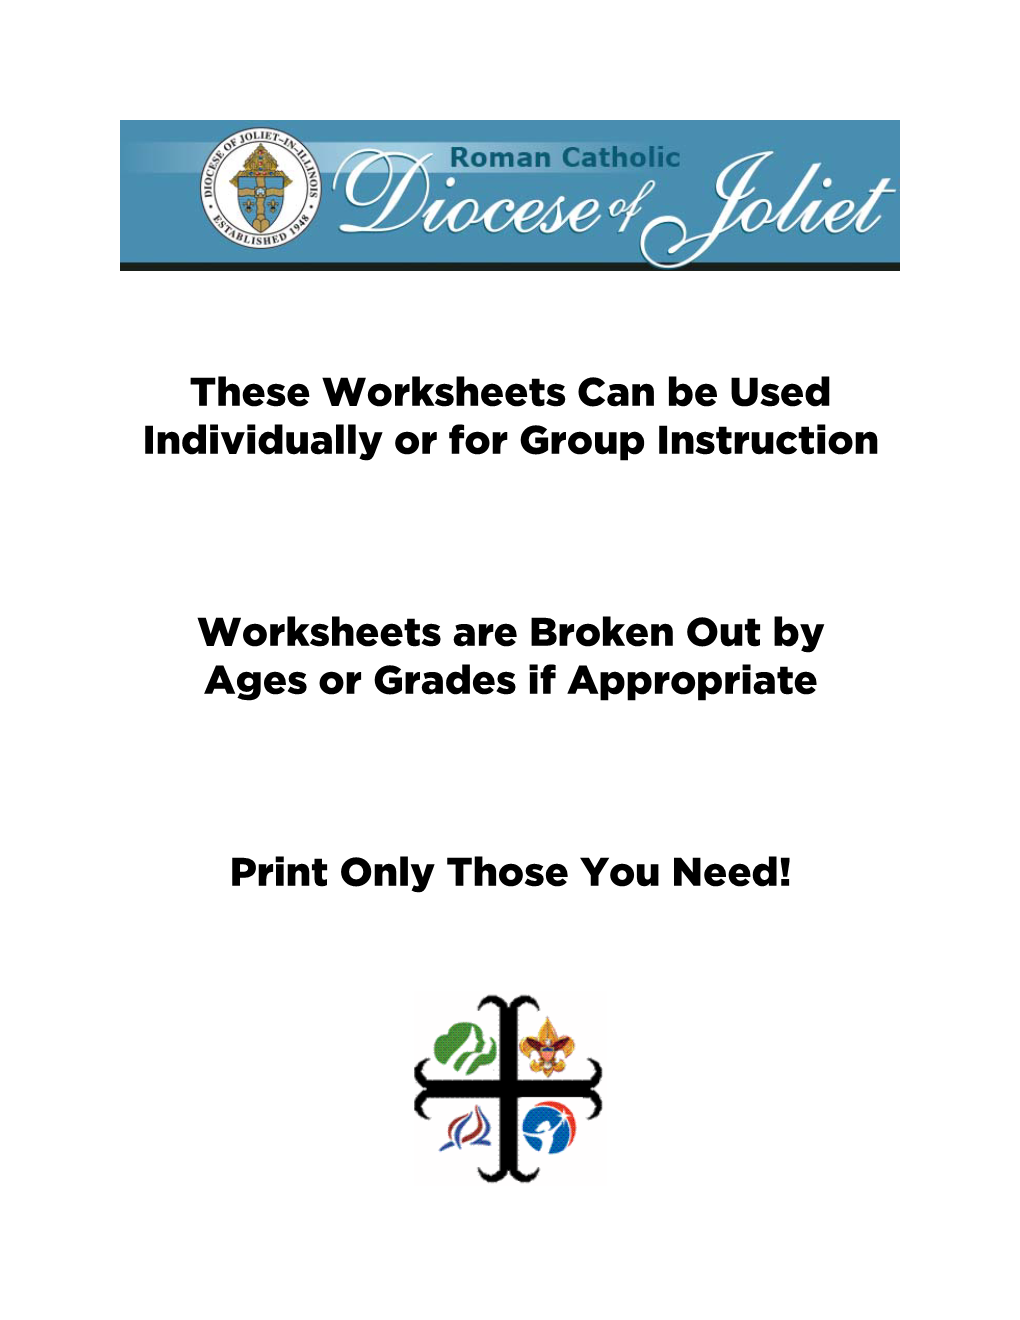 These Worksheets Can Be Used Individually Or for Group Instruction